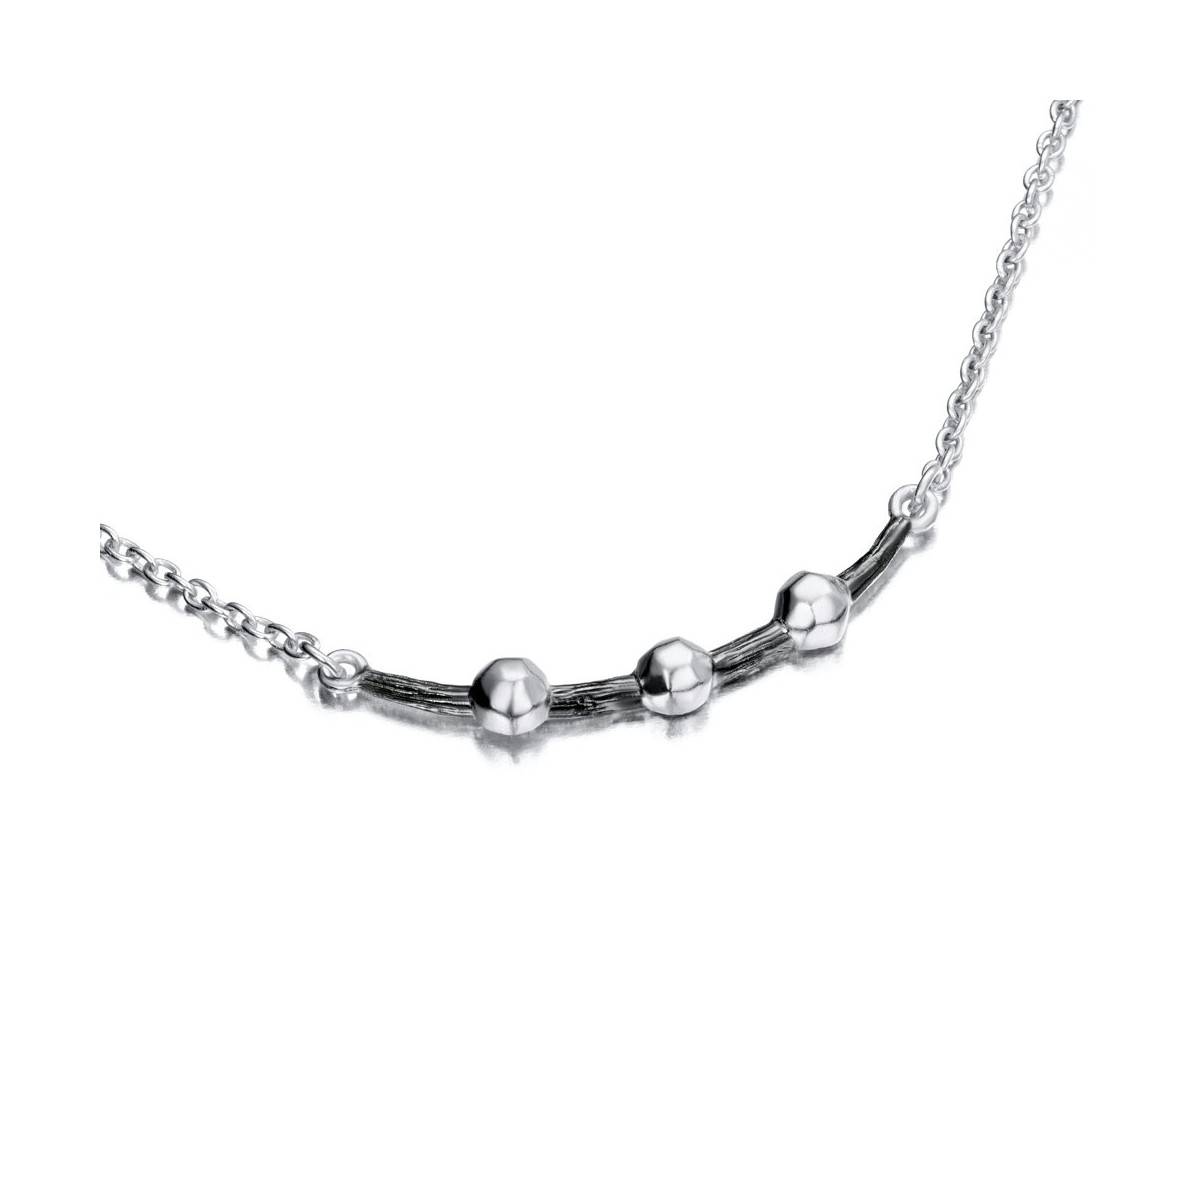 CELESTIAL Necklace in Silver and Black Ruthenium